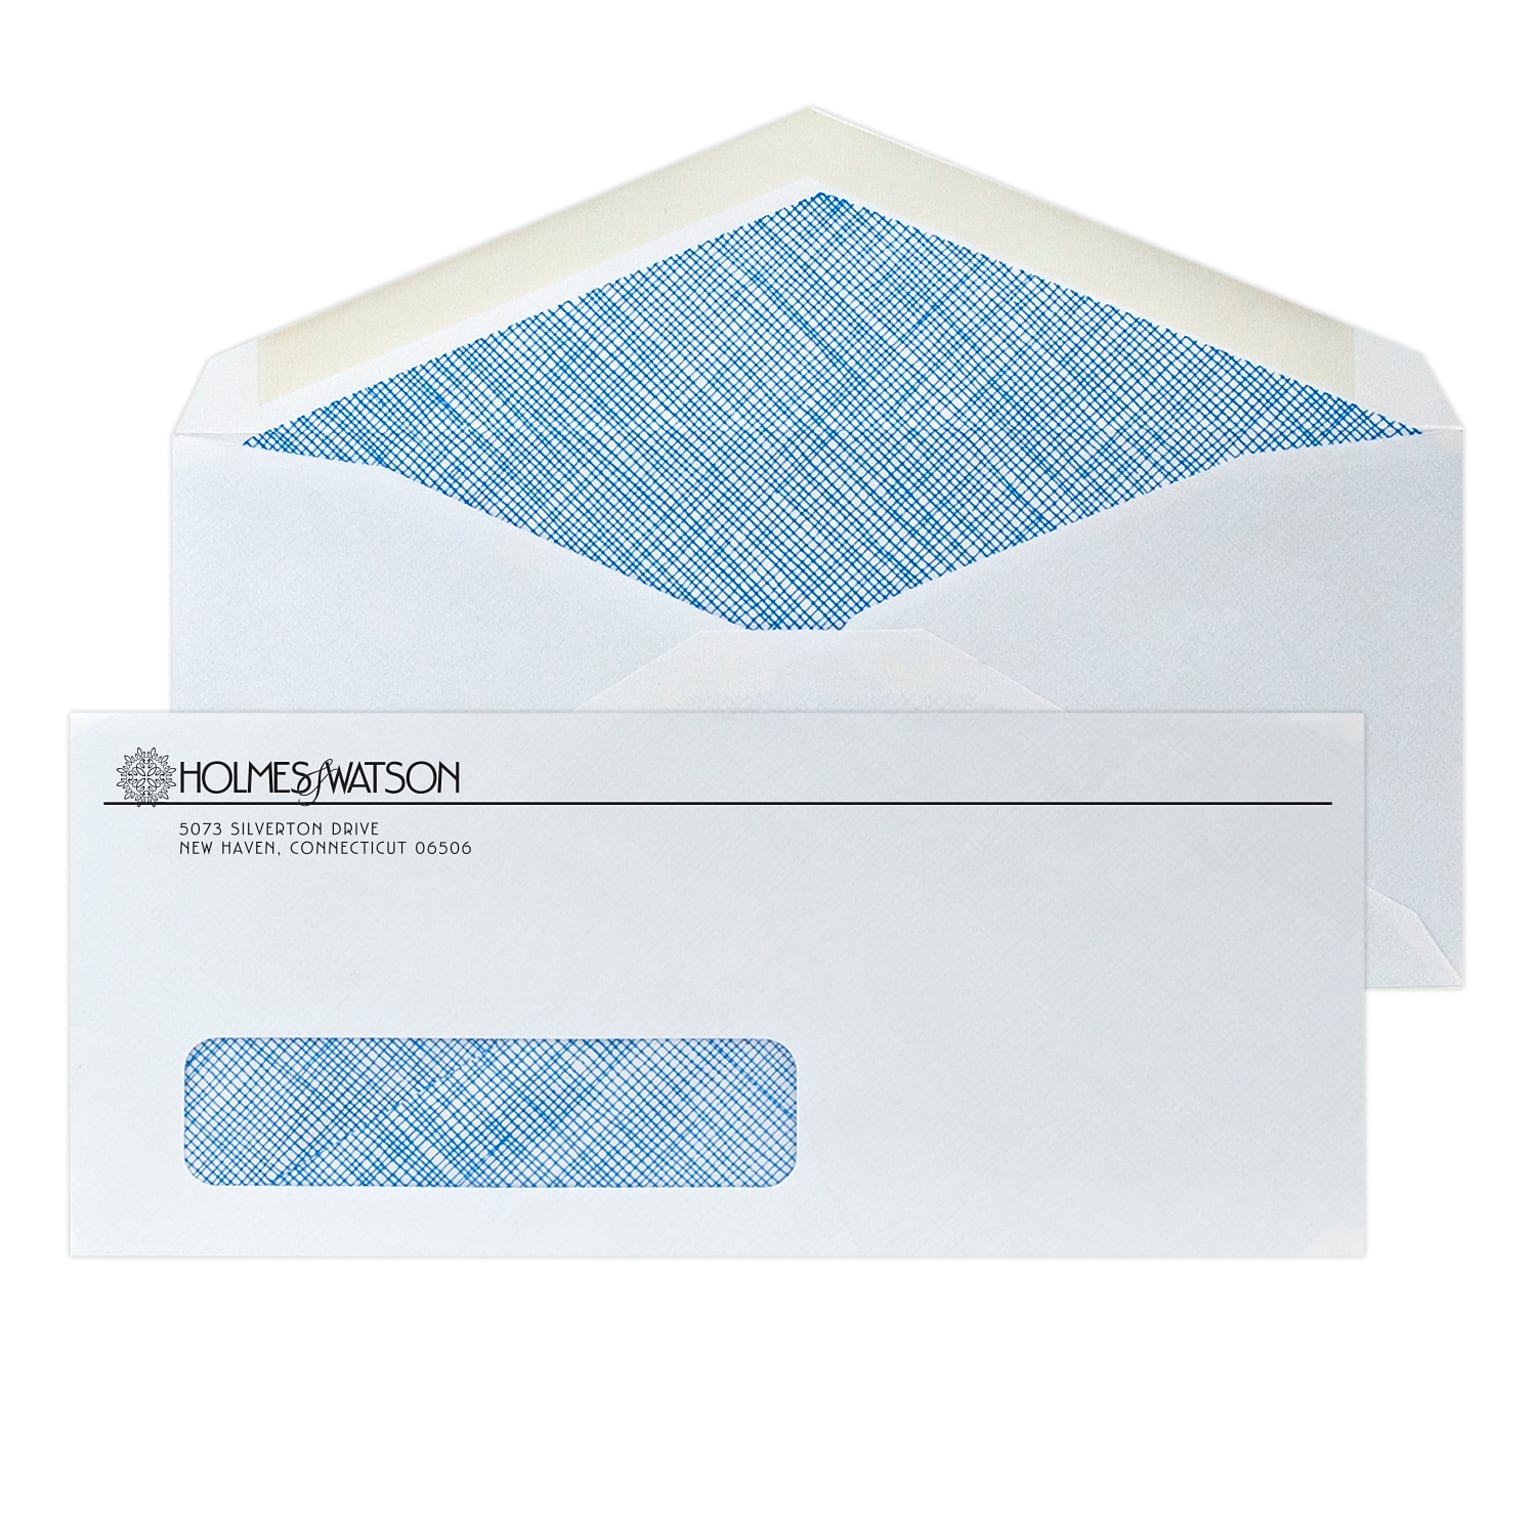 Custom #10 Window Envelopes with Security Tint and V-Flap, 4 1/4 x 9 1/2, 24# White Wove, 1 Standard Ink, 250 / Pack